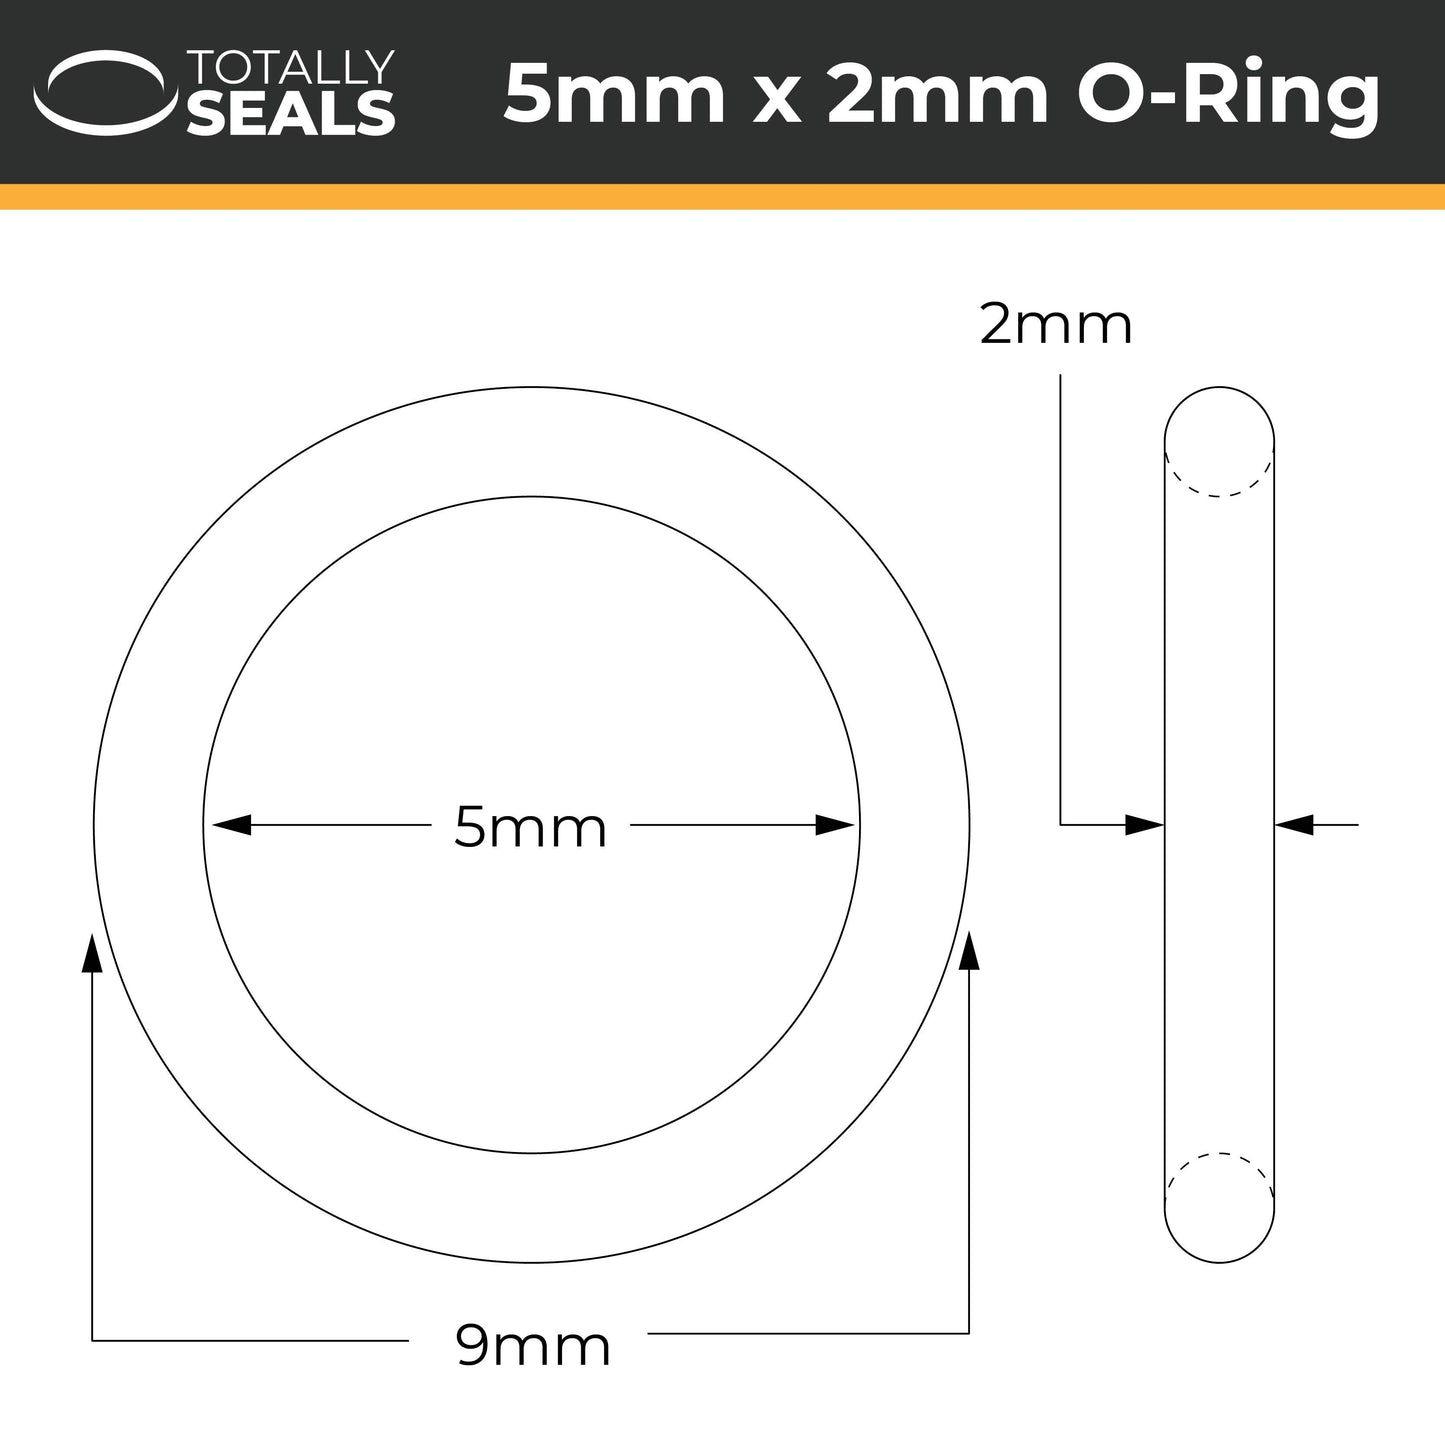 5mm x 2mm (9mm OD) Silicone O-Rings - Totally Seals®